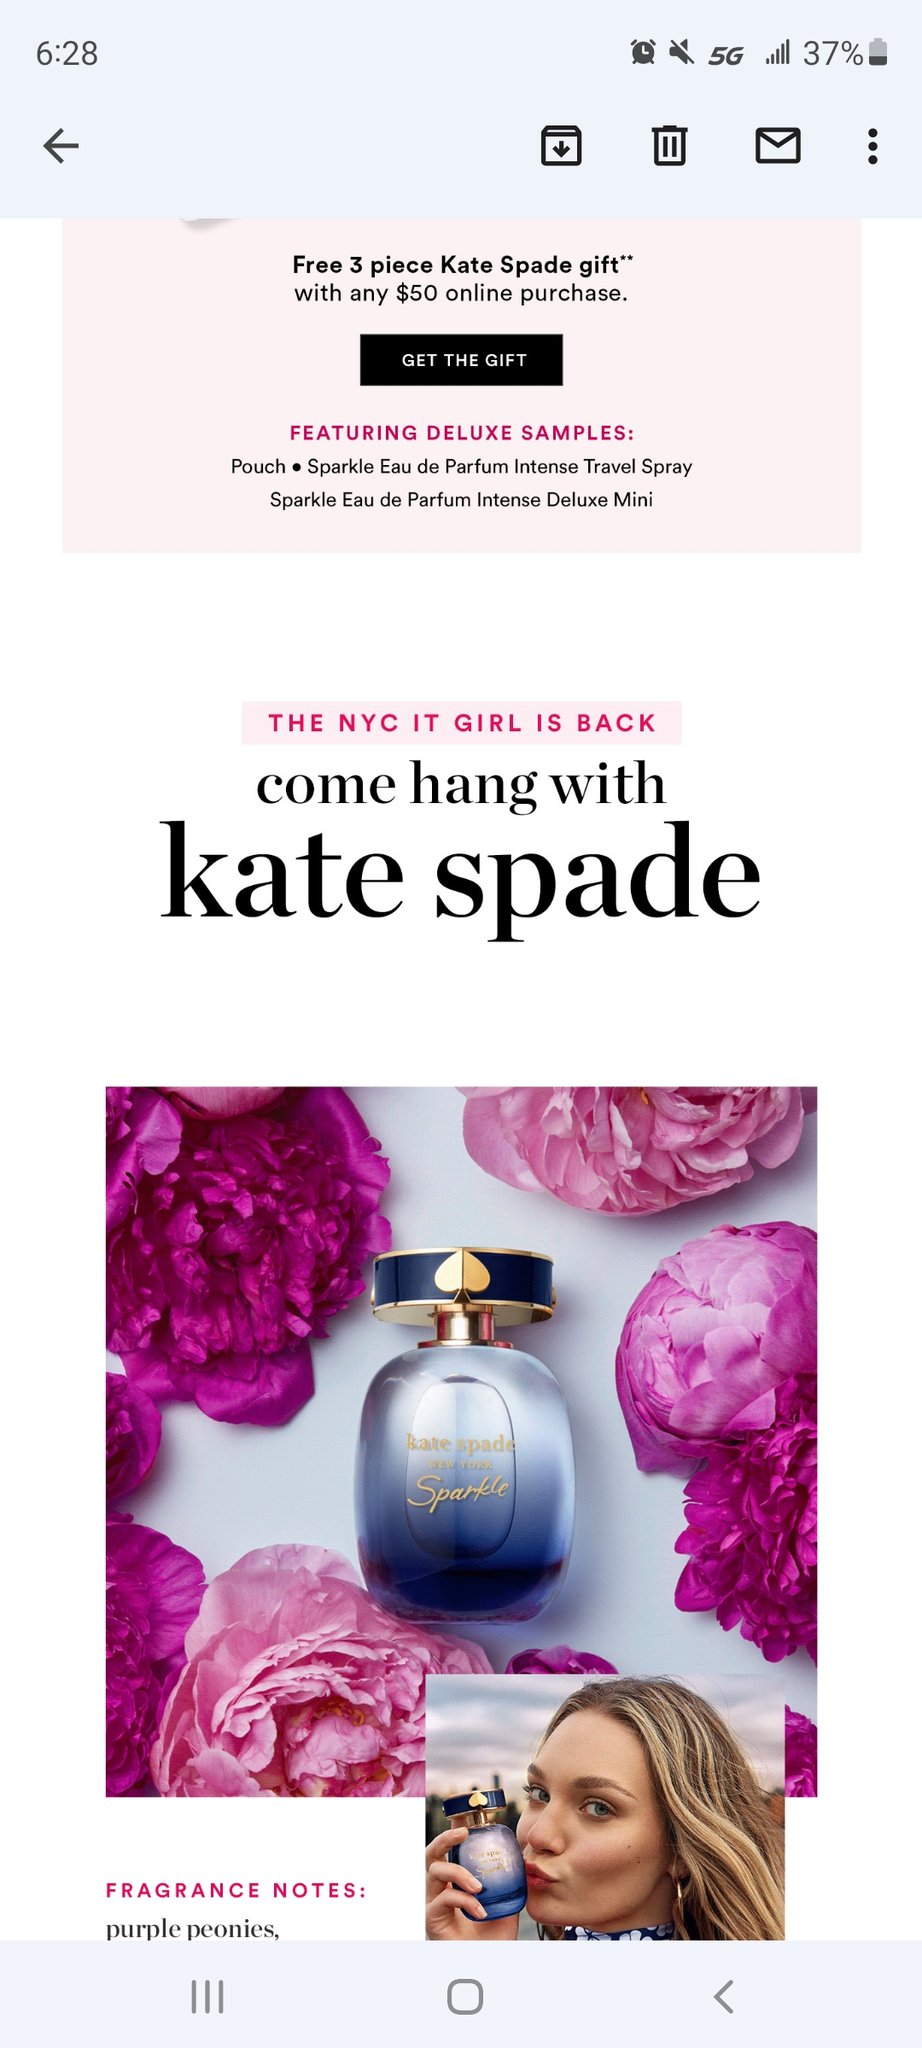 Ulta Beauty Sends Out Extremely Tone-Deaf Email Promo About Kate Spade